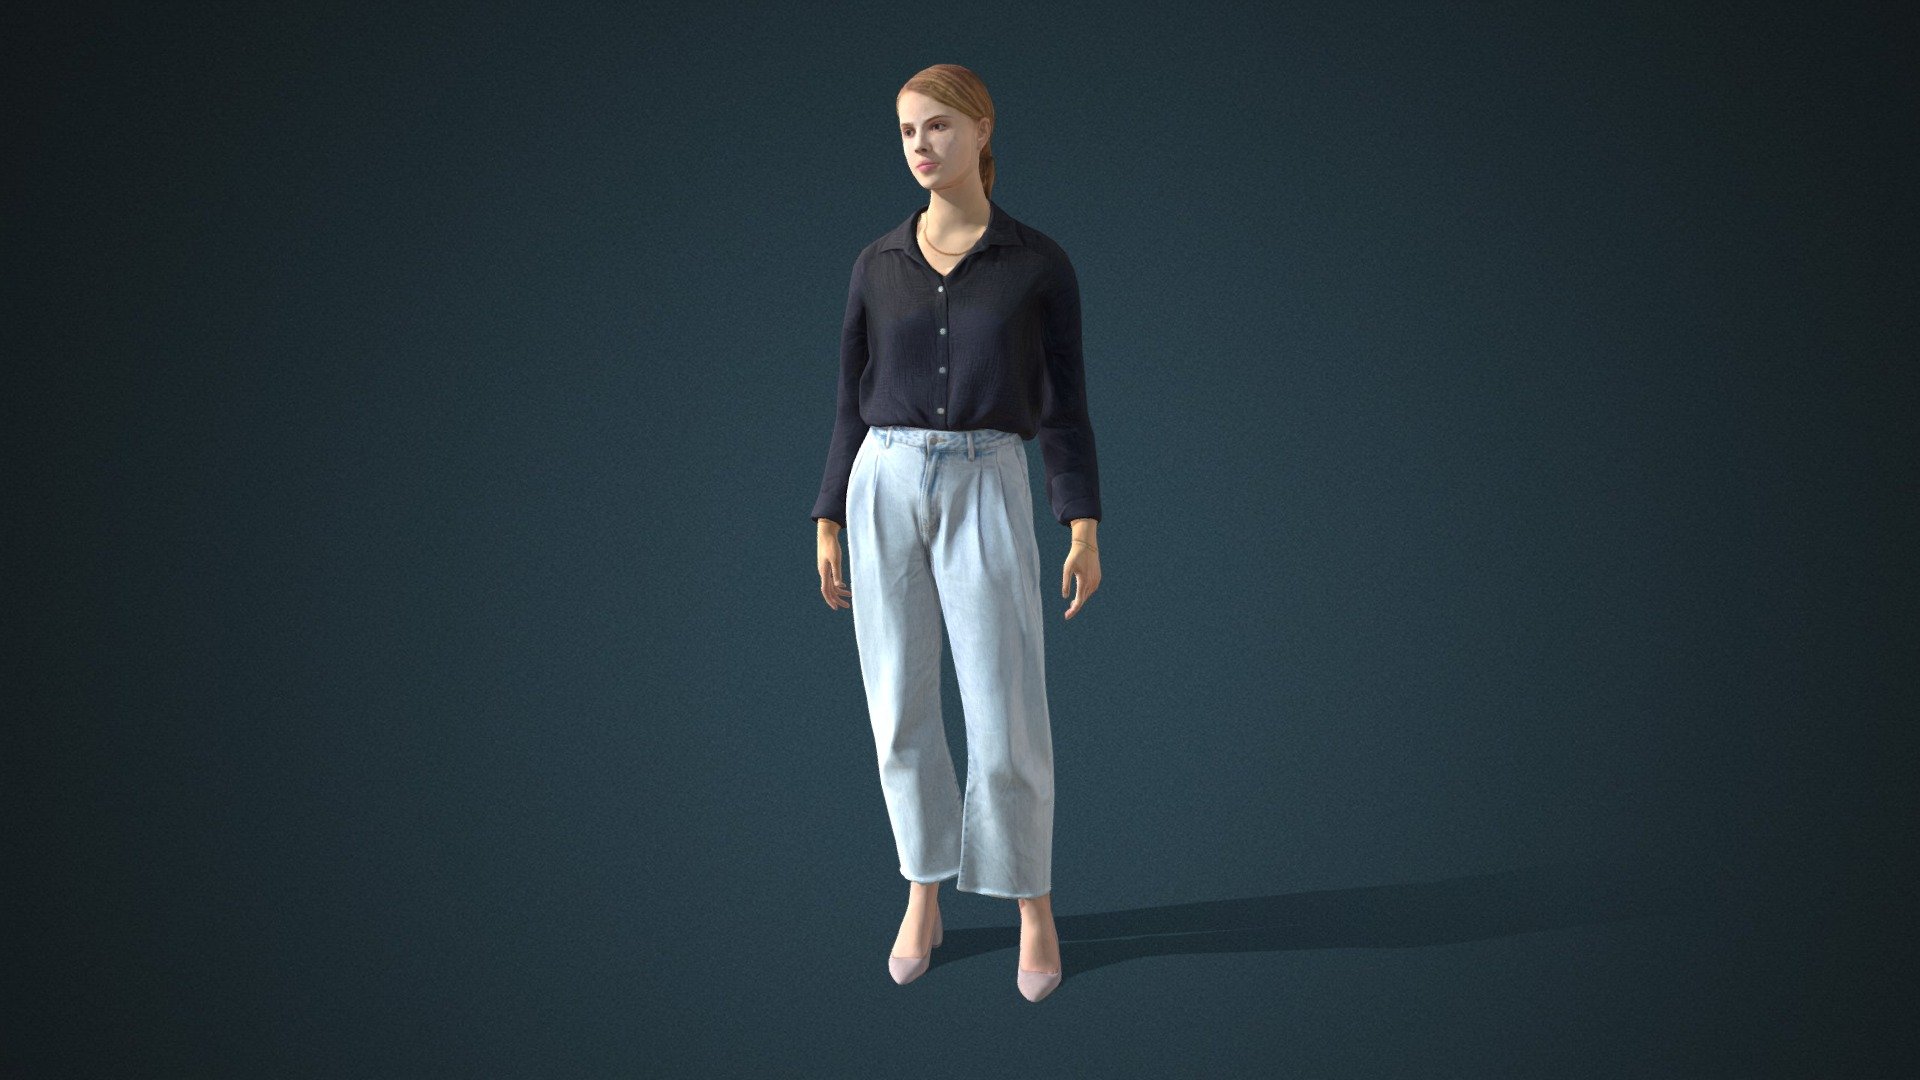 Do you like this model?  Free Download more models, motions and auto rigging tool AccuRIG (Value: $150+) on ActorCore
 

This model includes 2 mocap animations: Female_Idle, Female_Walk. Get more free motions

Design for high-performance crowd animation.

Buy full pack and Save 20%+: Street People Vol.1


SPECIFICATIONS

✔ Geometry : 7K~10K Quads, one mesh

✔ Material : One material with changeable colors.

✔ Texture Resolution : 4K

✔ Shader : PBR, Diffuse, Normal, Roughness, Metallic, Opacity

✔ Rigged : Facial and Body (shoulders, fingers, toes, eyeballs, jaw)

✔ Blendshape : 122 for facial expressions and lipsync

✔ Compatible with iClone AccuLips, Facial ExPlus, and traditional lip-sync.


About Reallusion ActorCore

ActorCore offers the highest quality 3D asset libraries for mocap motions and animated 3D humans for crowd rendering 3d model